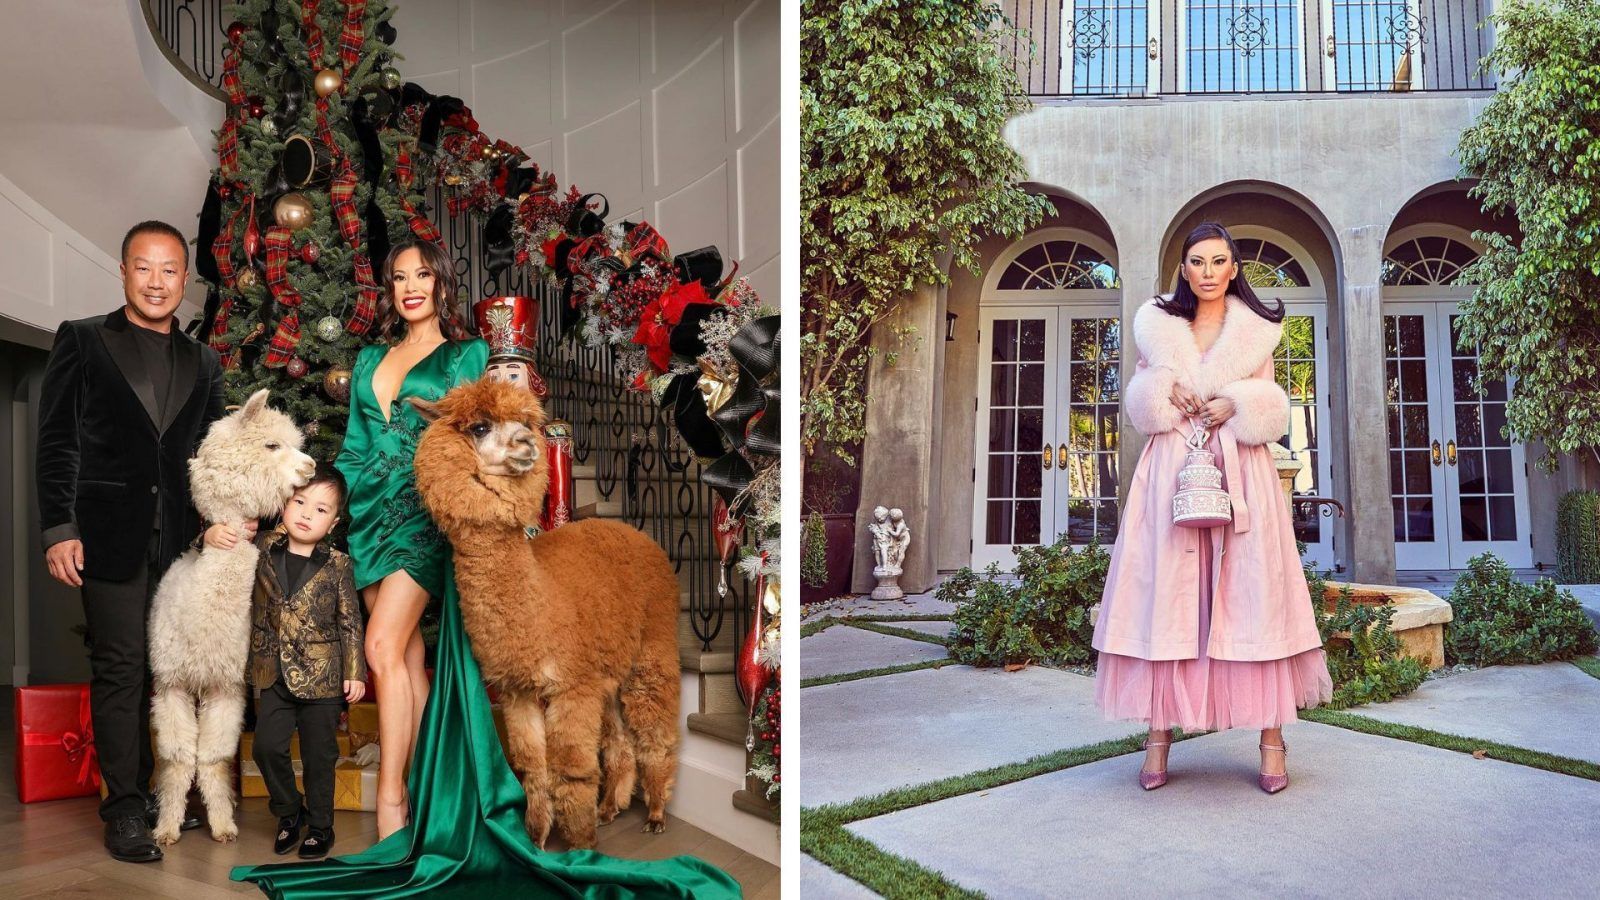 Which Bling Empire cast member has the most fabulous home? From